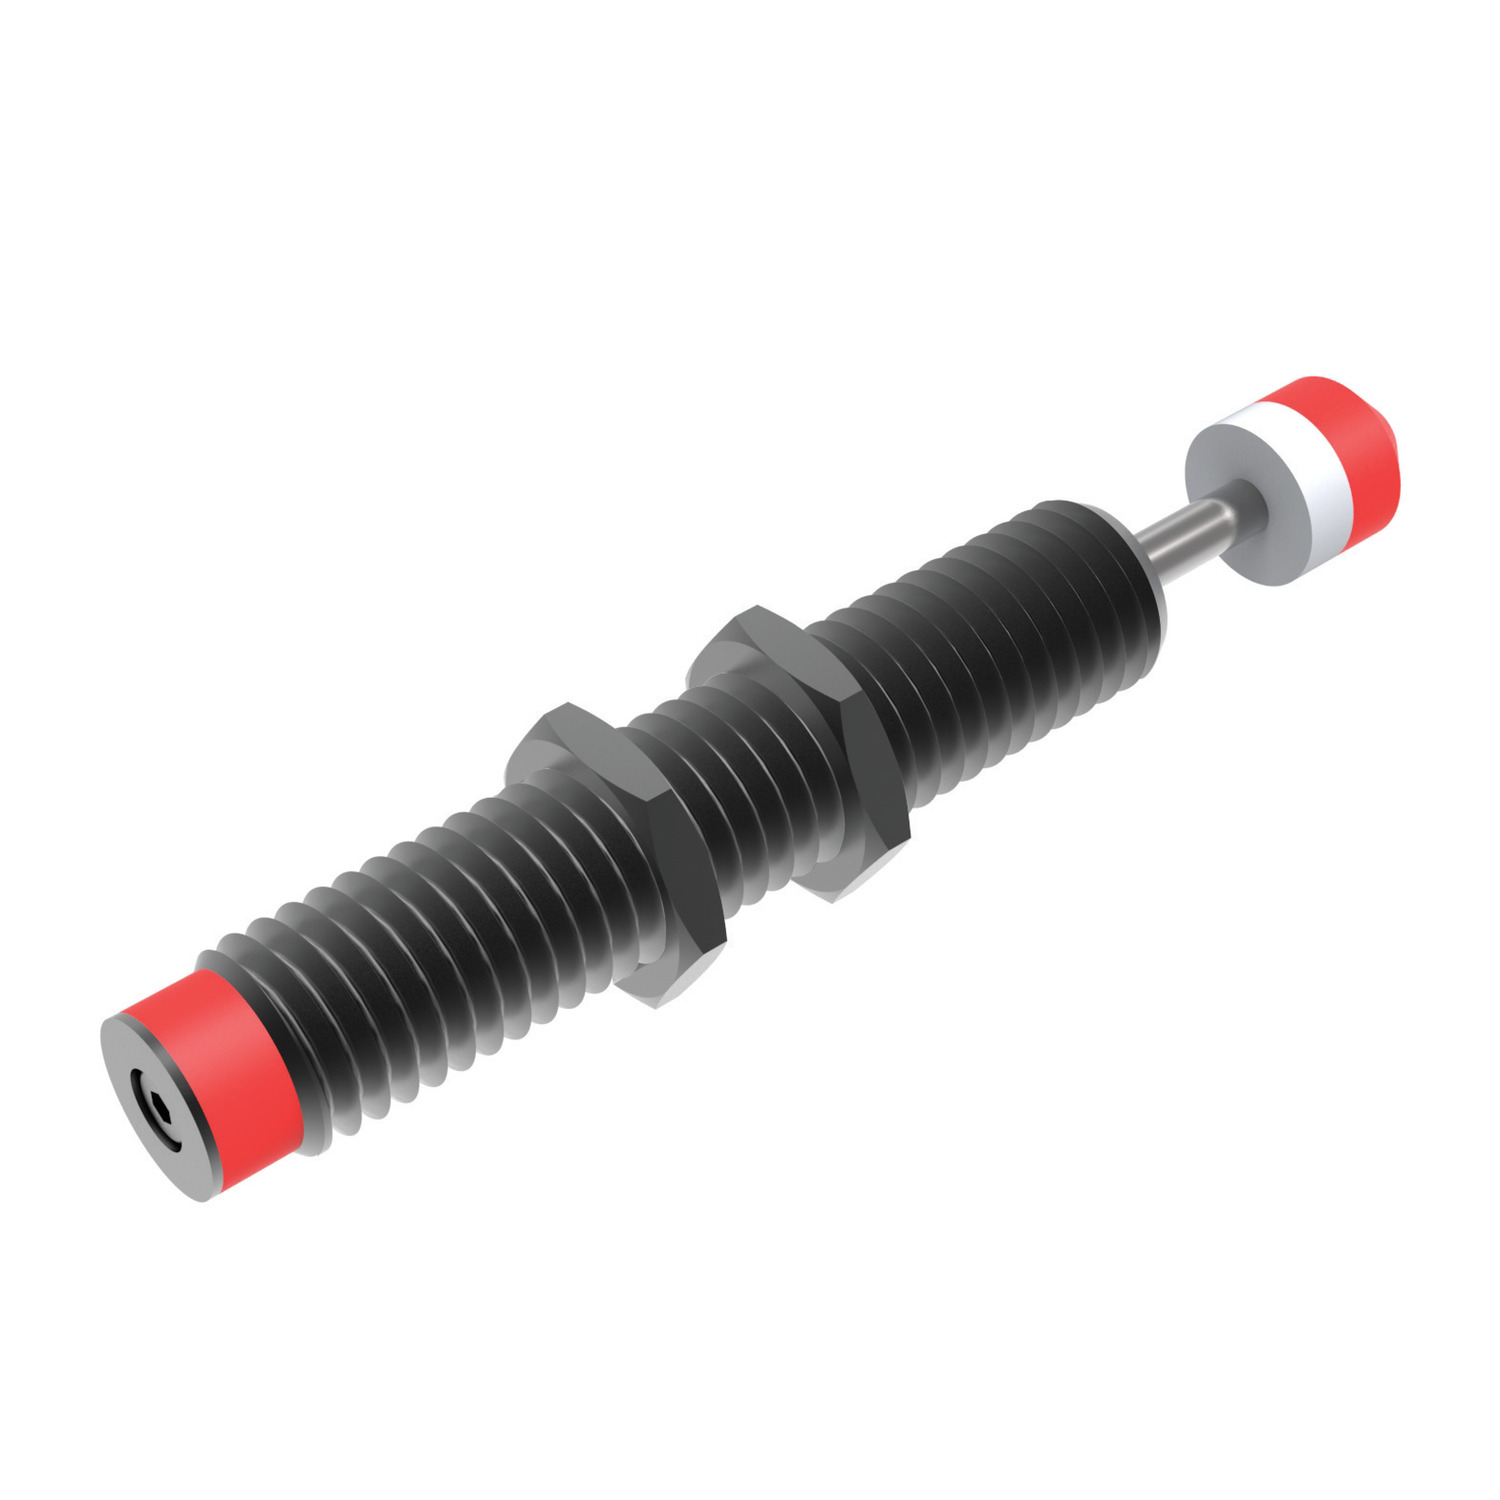 Shock Absorbers, Self Compensating Self compensating shock absorbers, available in M14 - M20 threads. Supplied with removable rubber muffler cap as standard. Please refer to our product selection formulae.